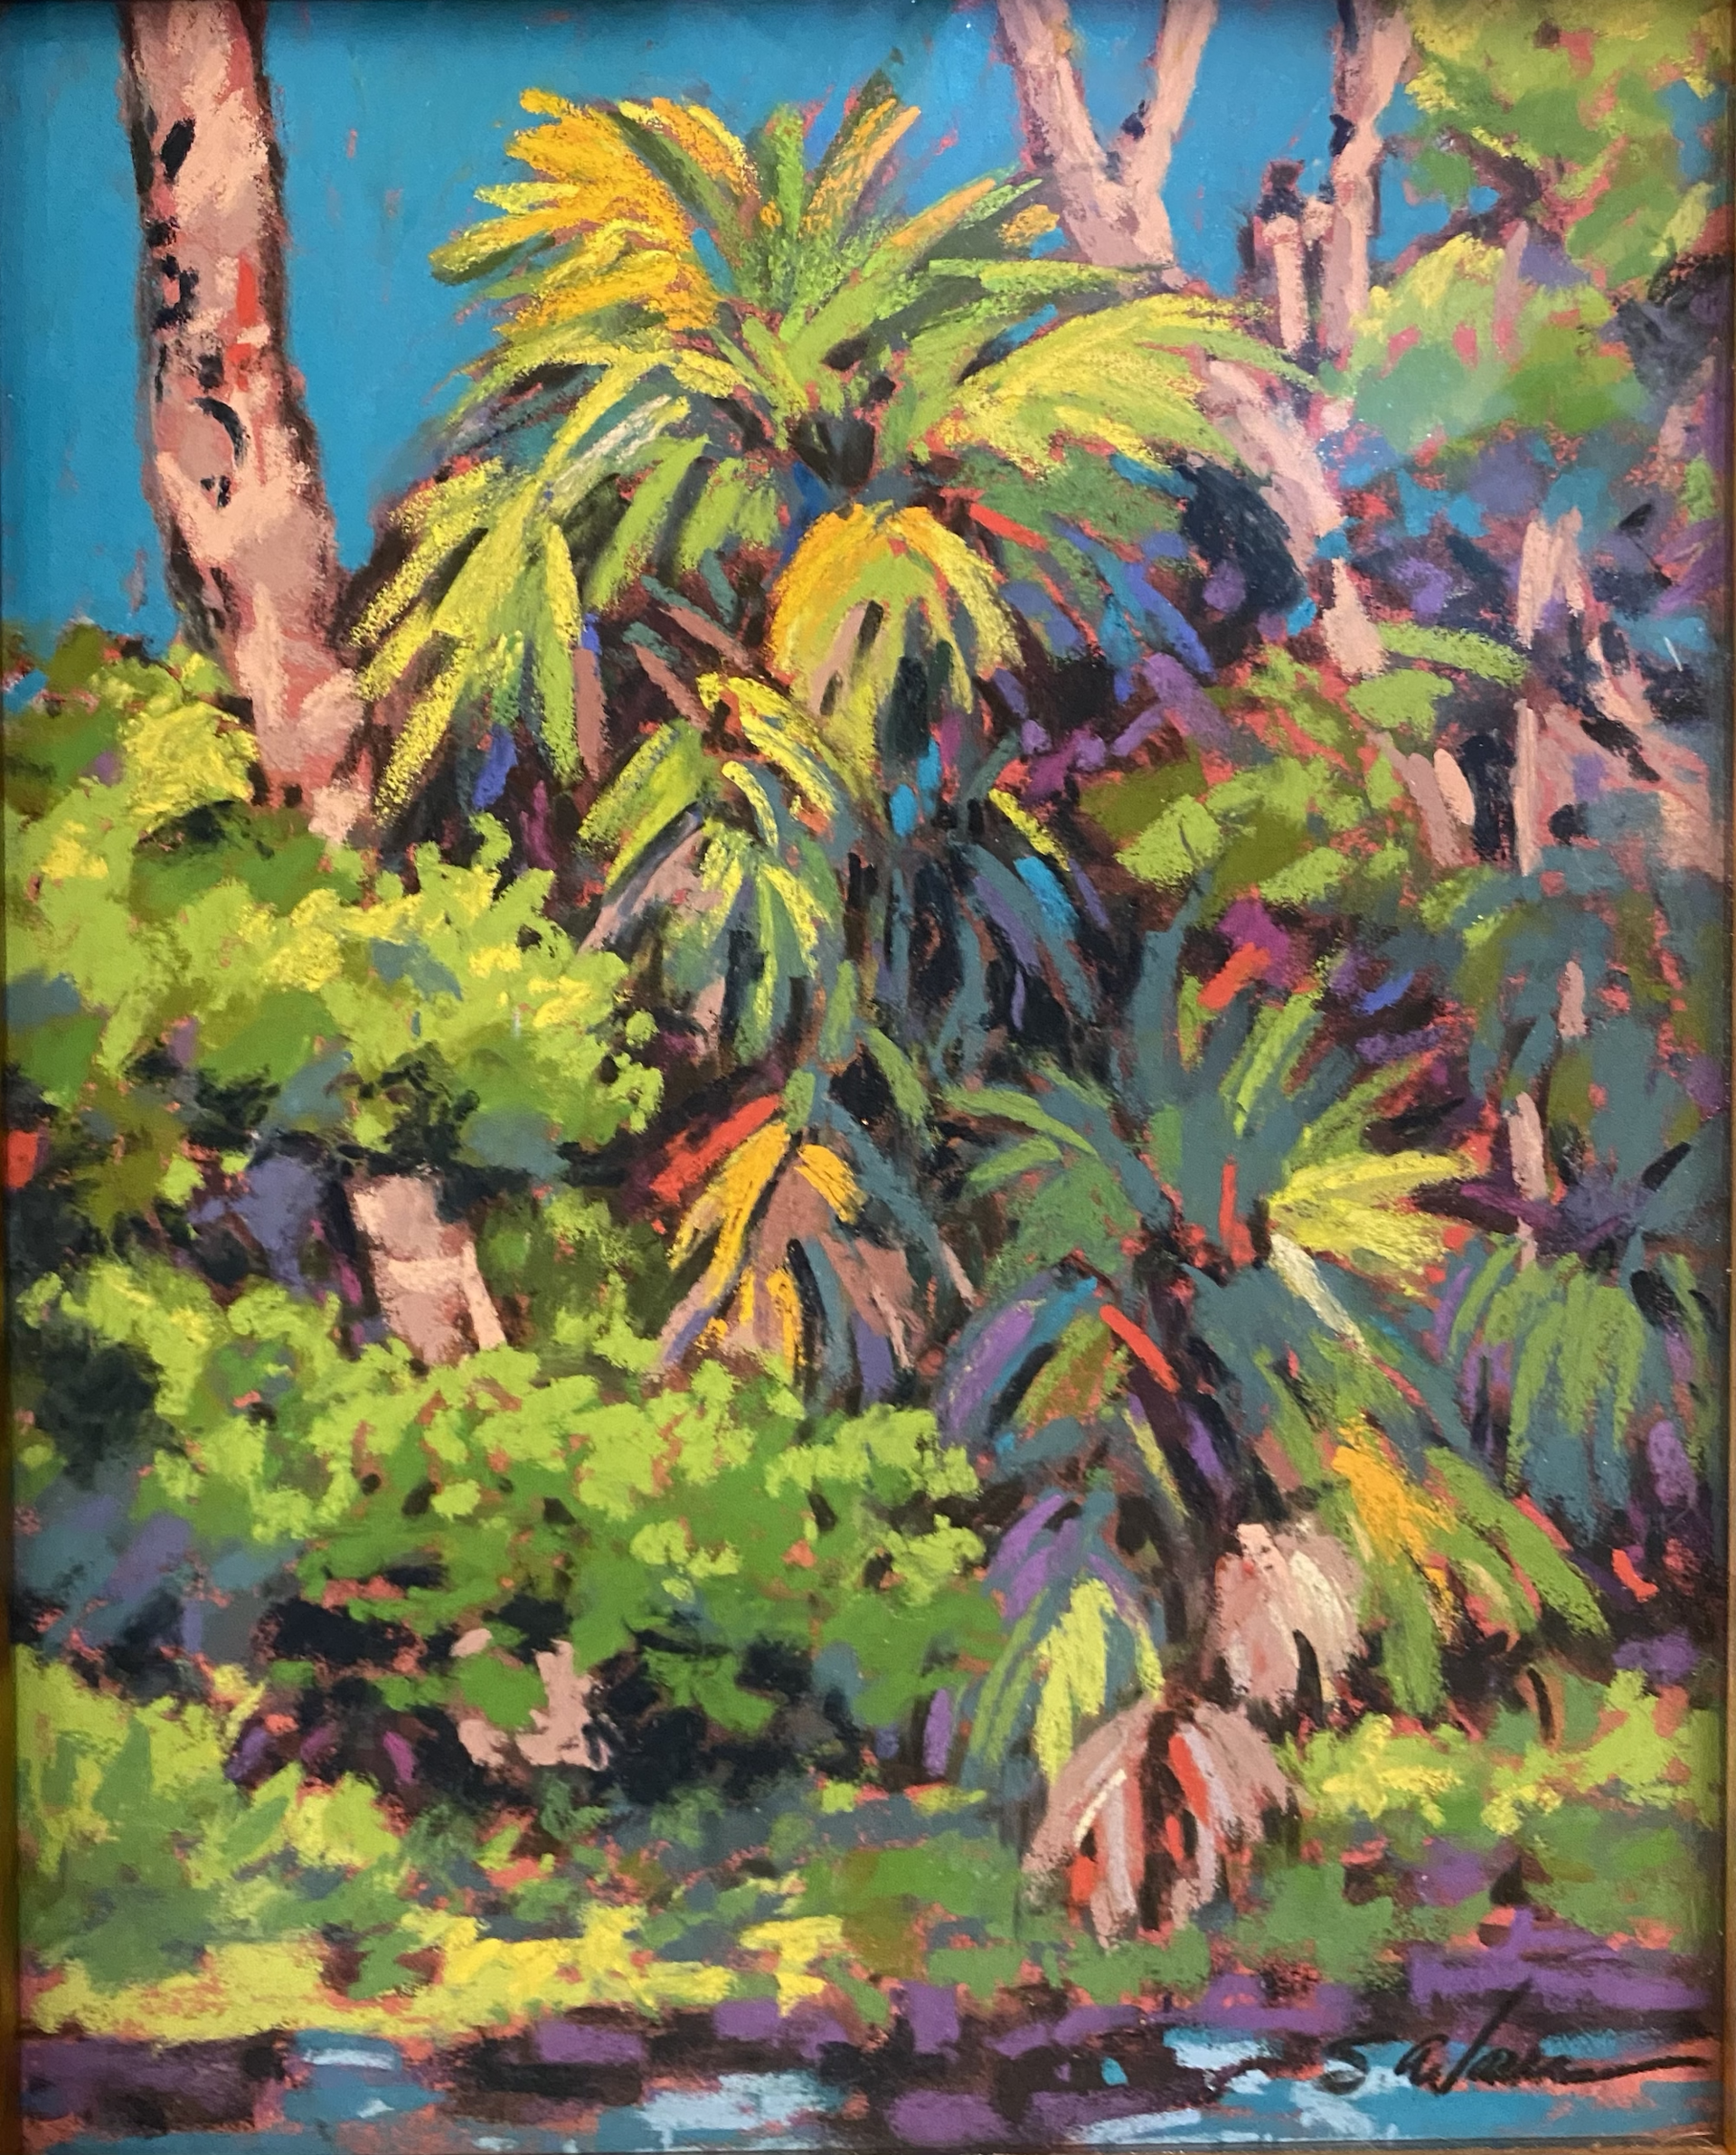 Wekiva Blue and Green by Sally Evans